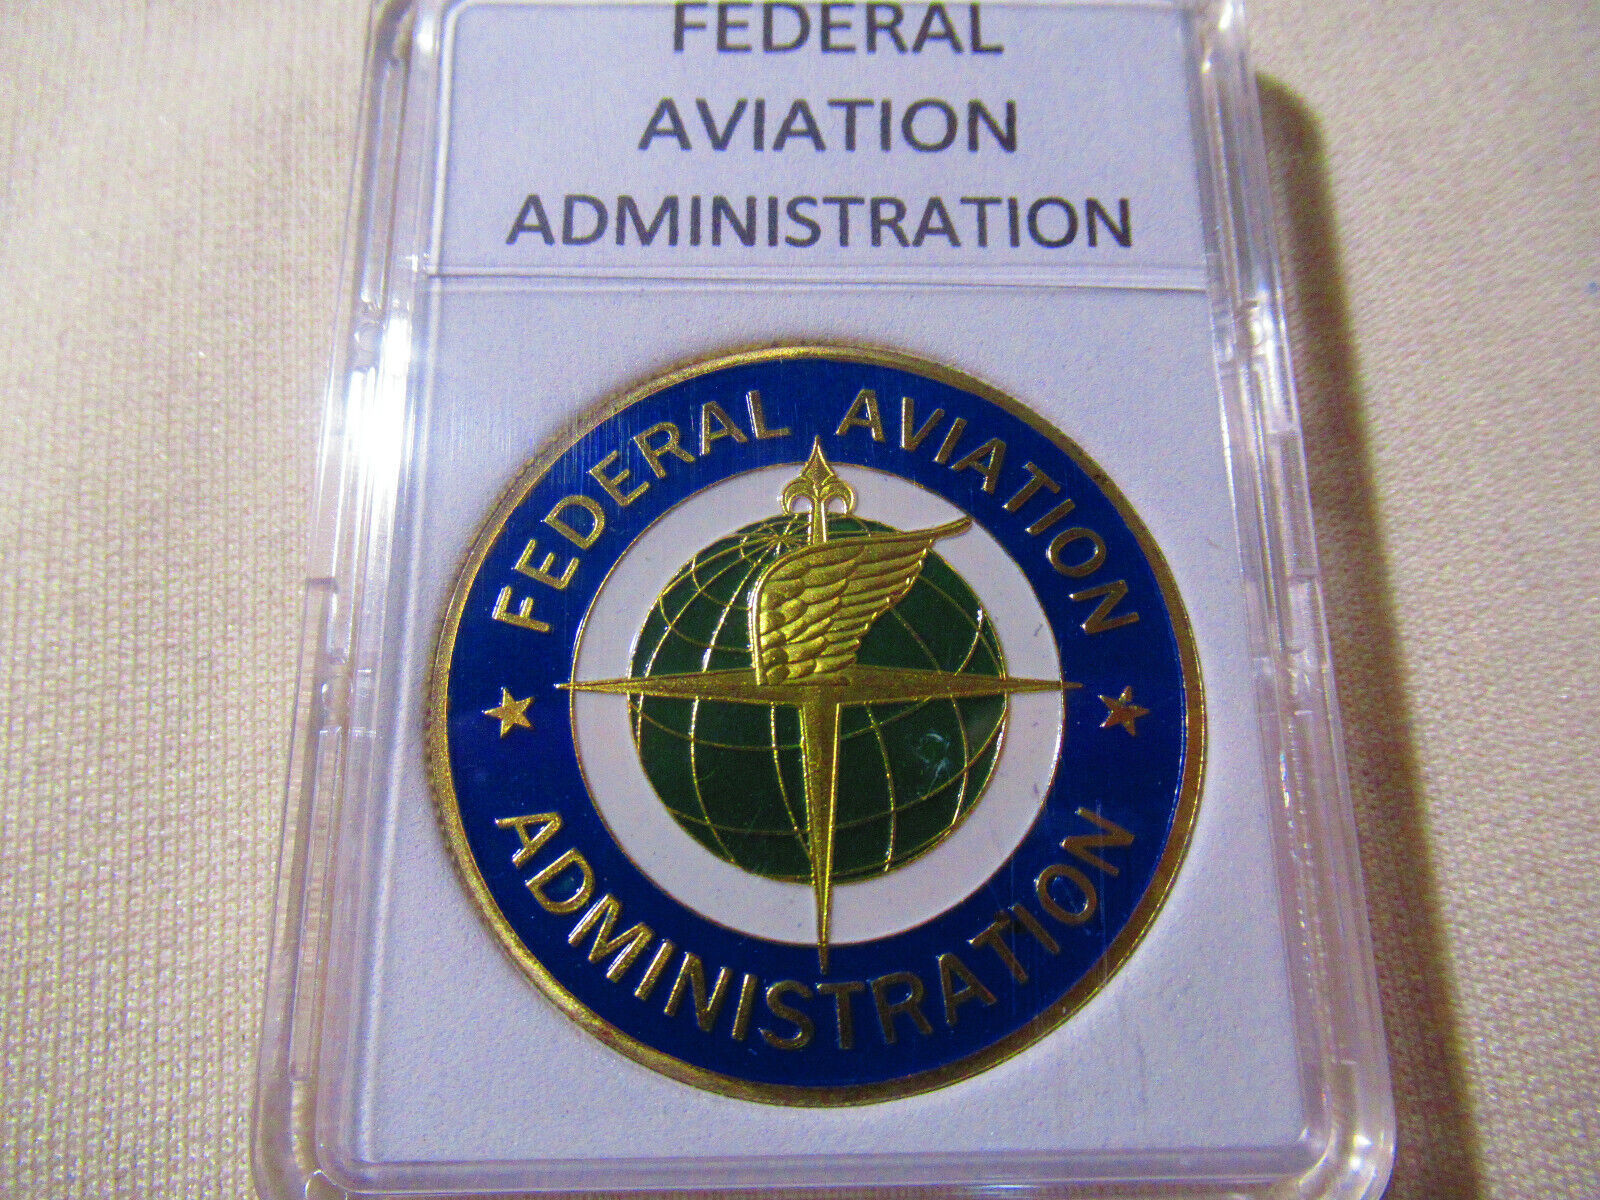 FEDERAL AVIATION ADMINISTRATION (FAA) Challenge Coin